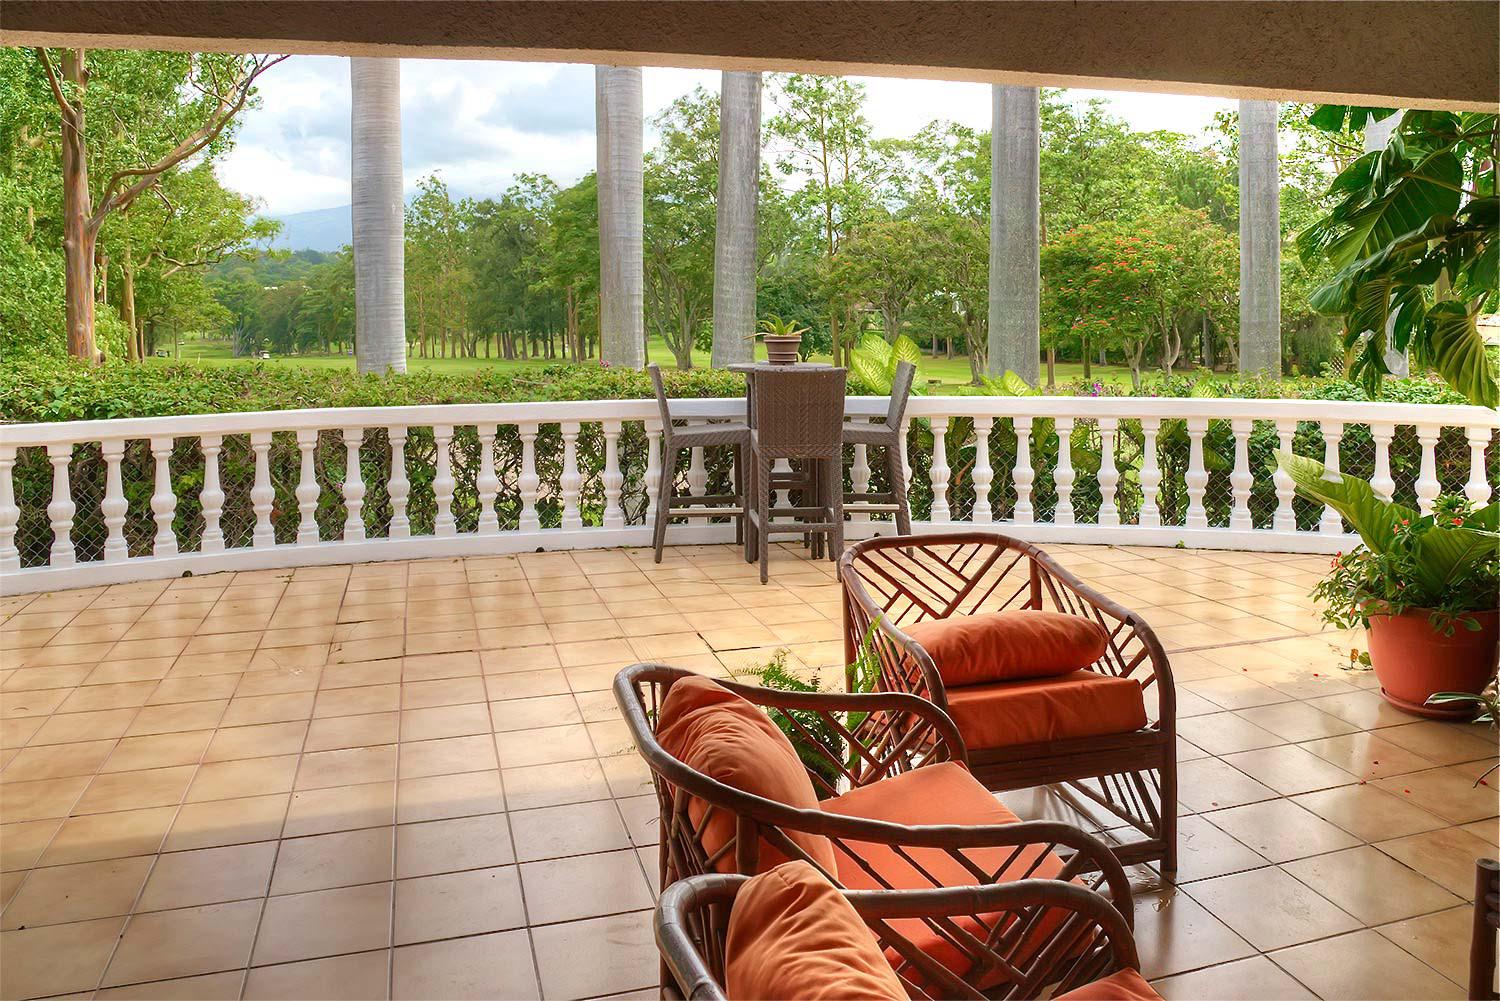 Costa Rica, Real Estate, Golf front, Home for sale, private pool, guest house, 7 bedrooms, 6 bathrooms, Cariari Golf Course, estate, golf properties, 9th hole view